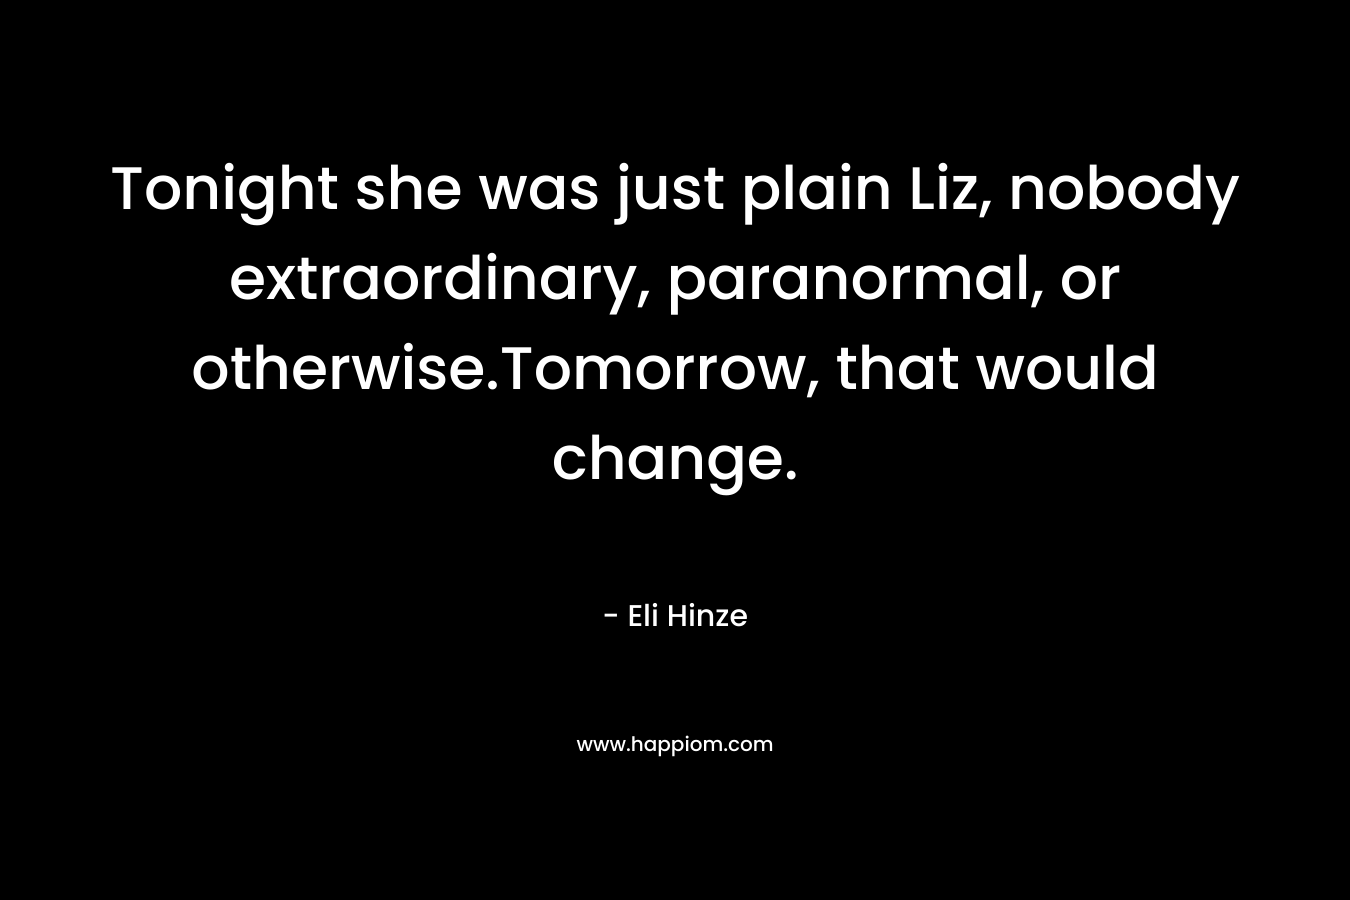 Tonight she was just plain Liz, nobody extraordinary, paranormal, or otherwise.Tomorrow, that would change.